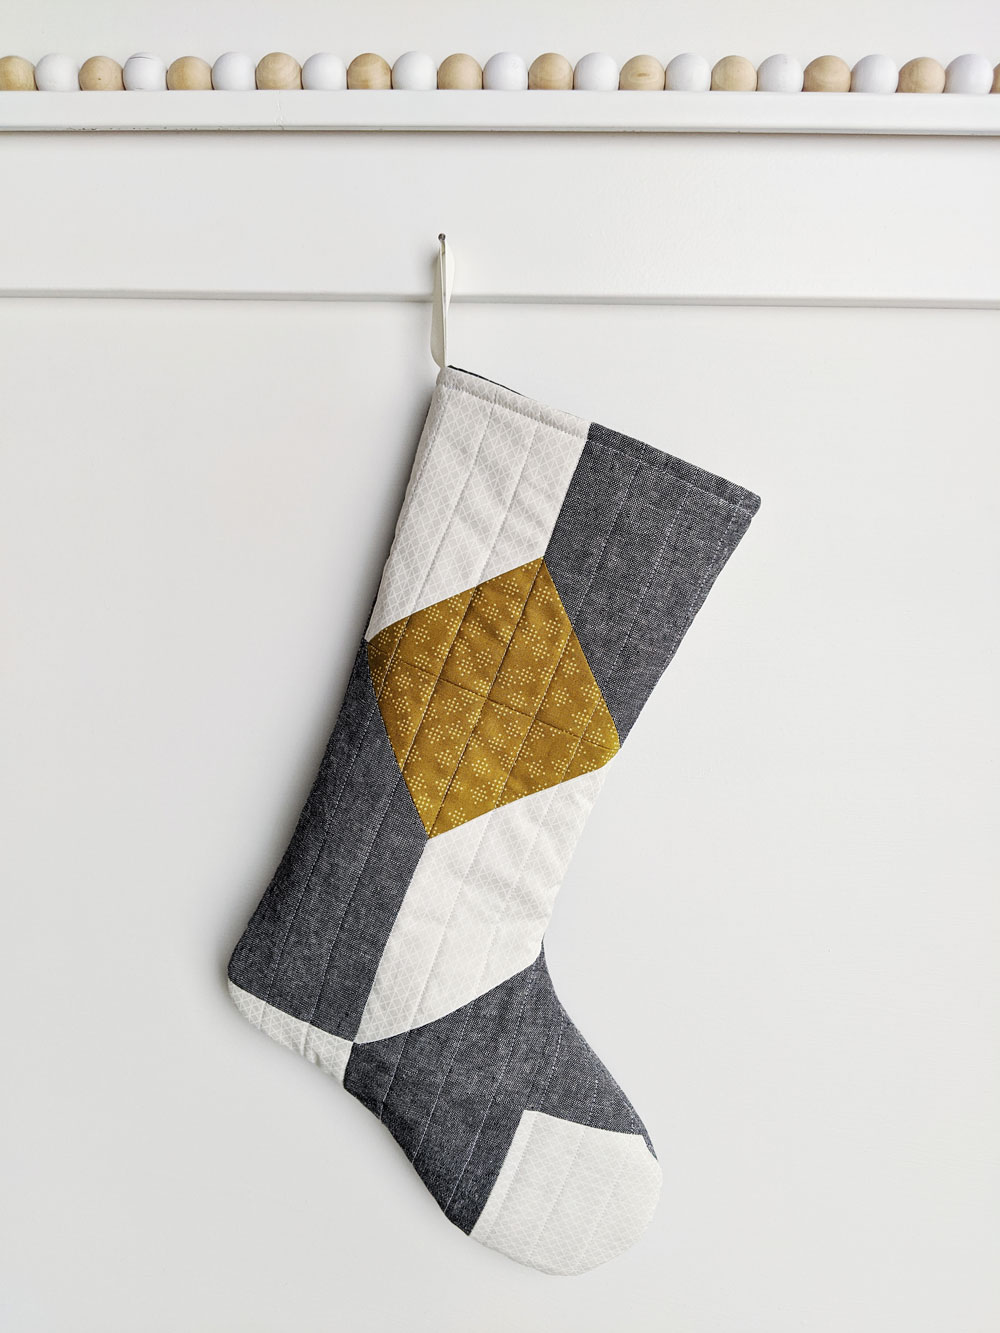 A free quilted Christmas stocking pattern right in time for the holidays! Sew a simple, modern stocking with this step by step tutorial. suzyquilts.com #DIYstocking #quilttutorial